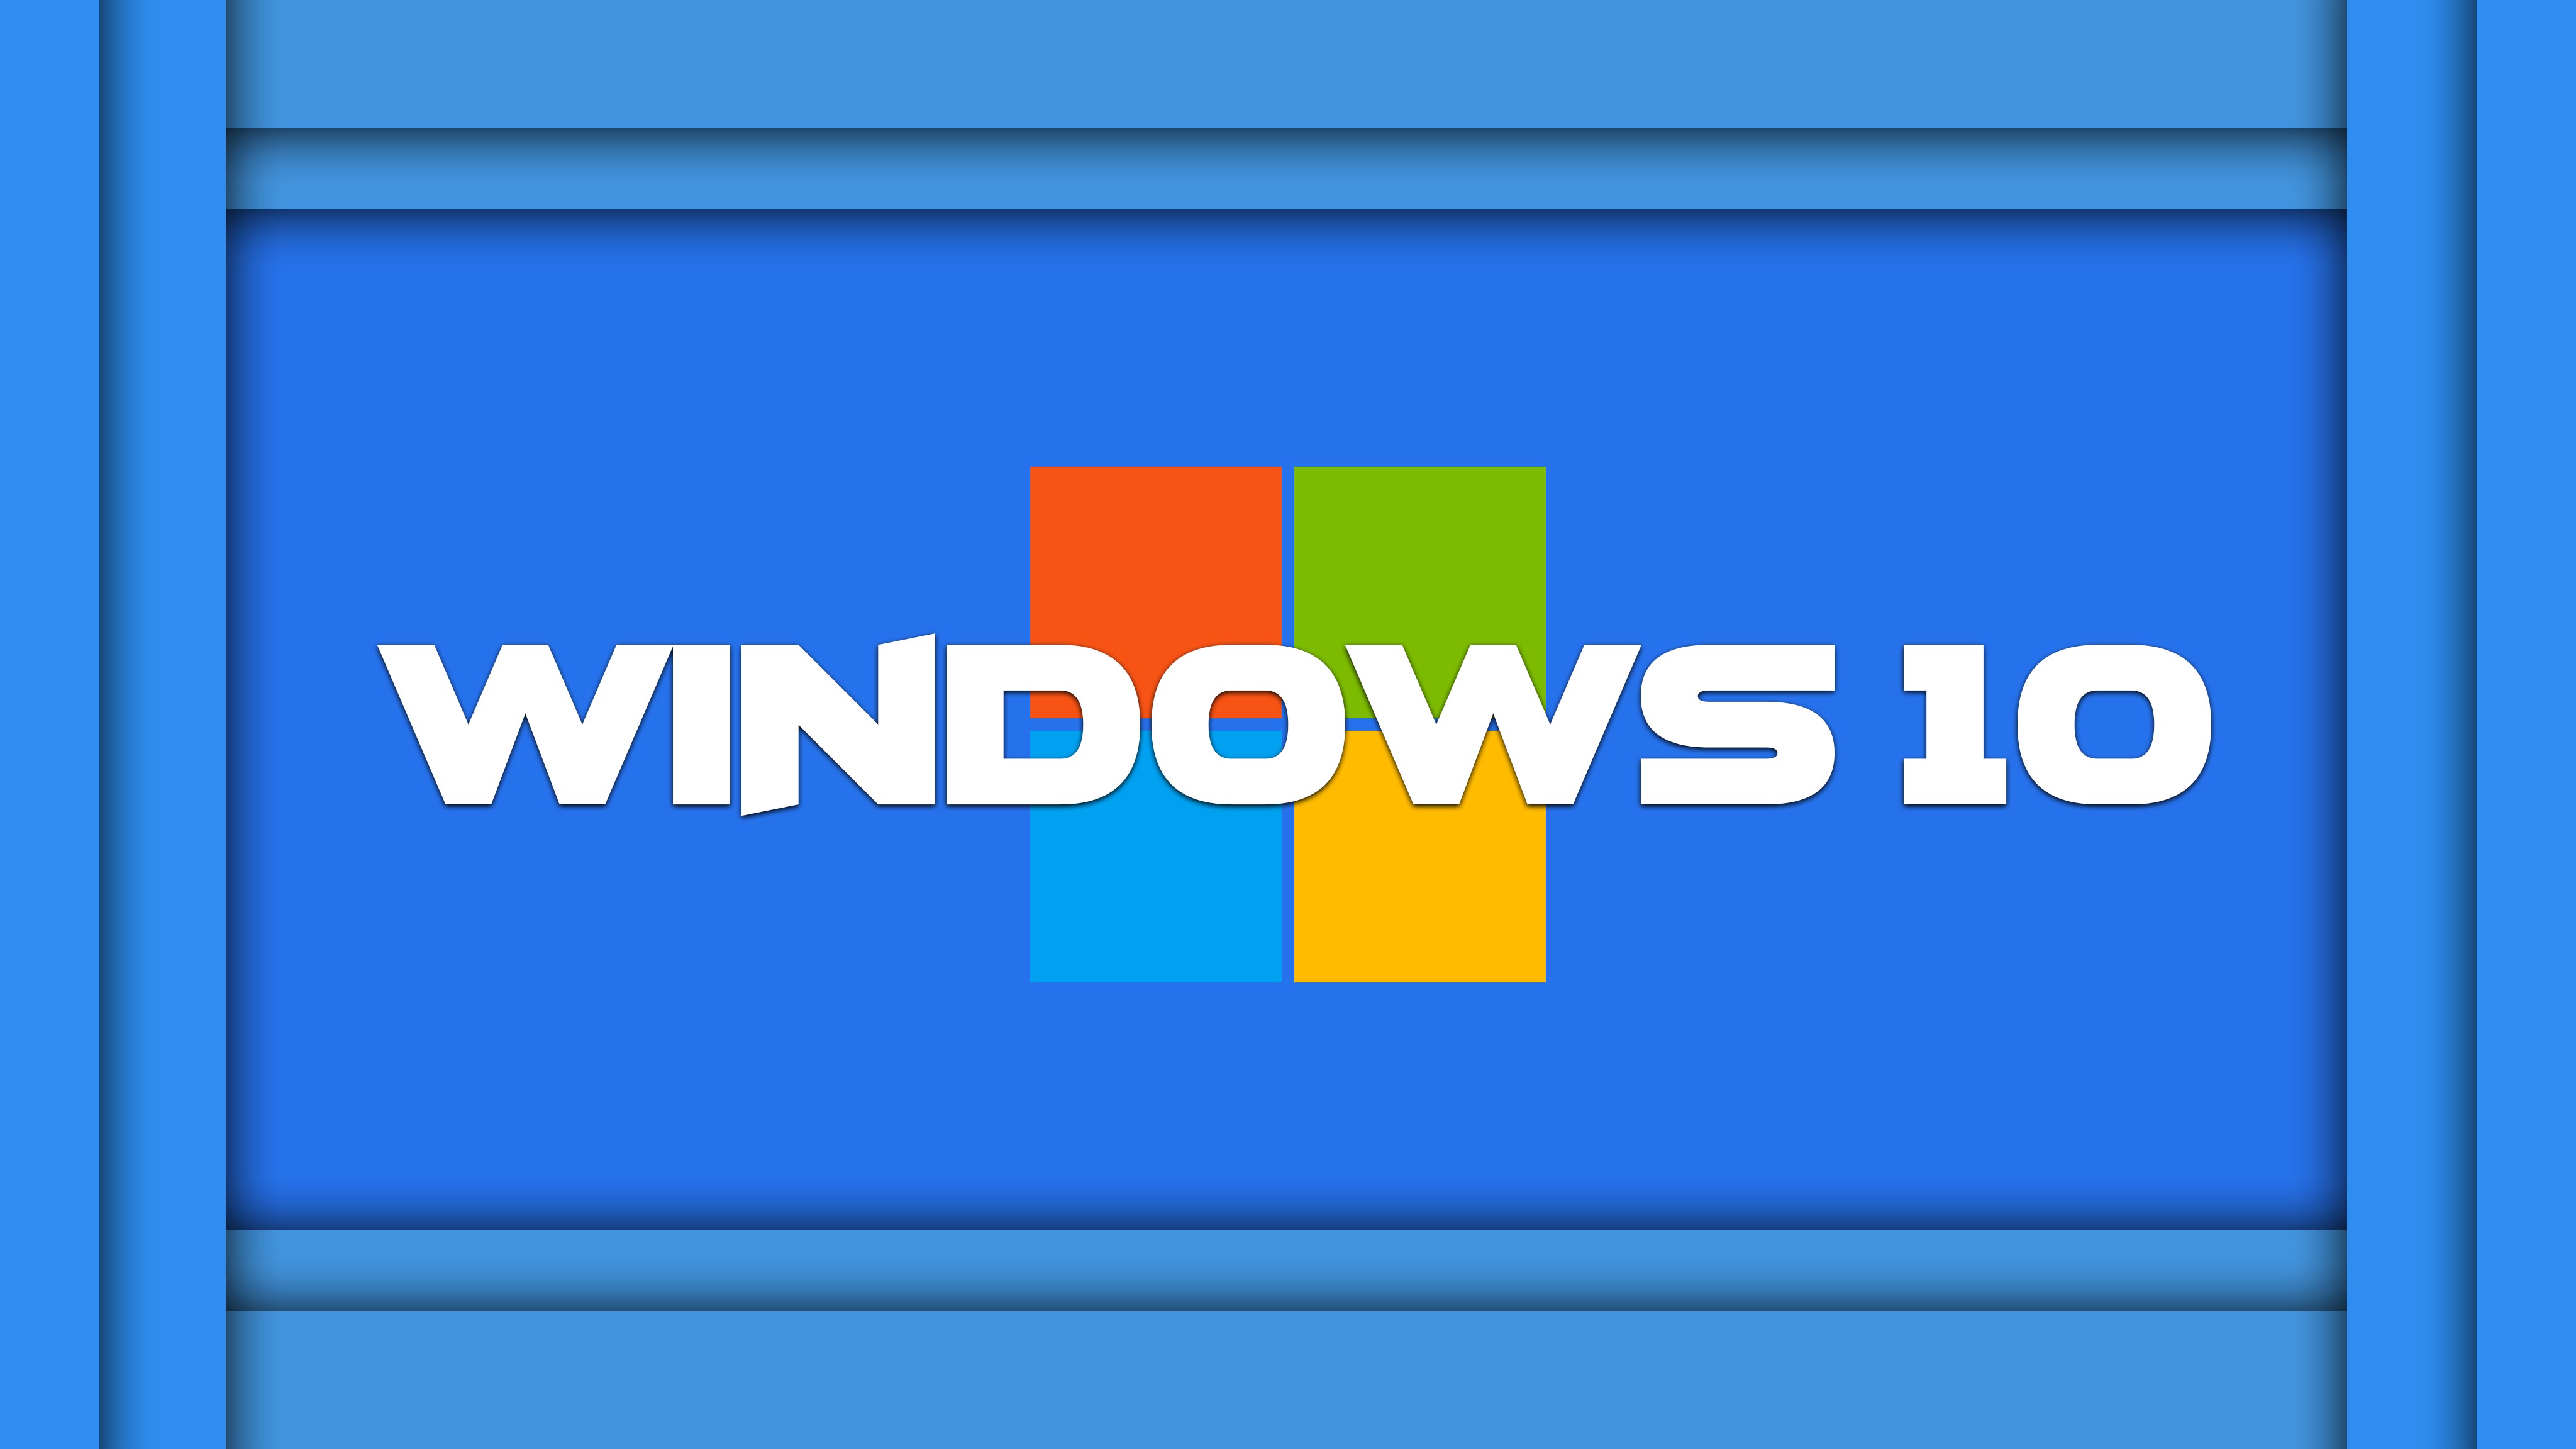 Windows 10, Operating systems, Computer Wallpaper